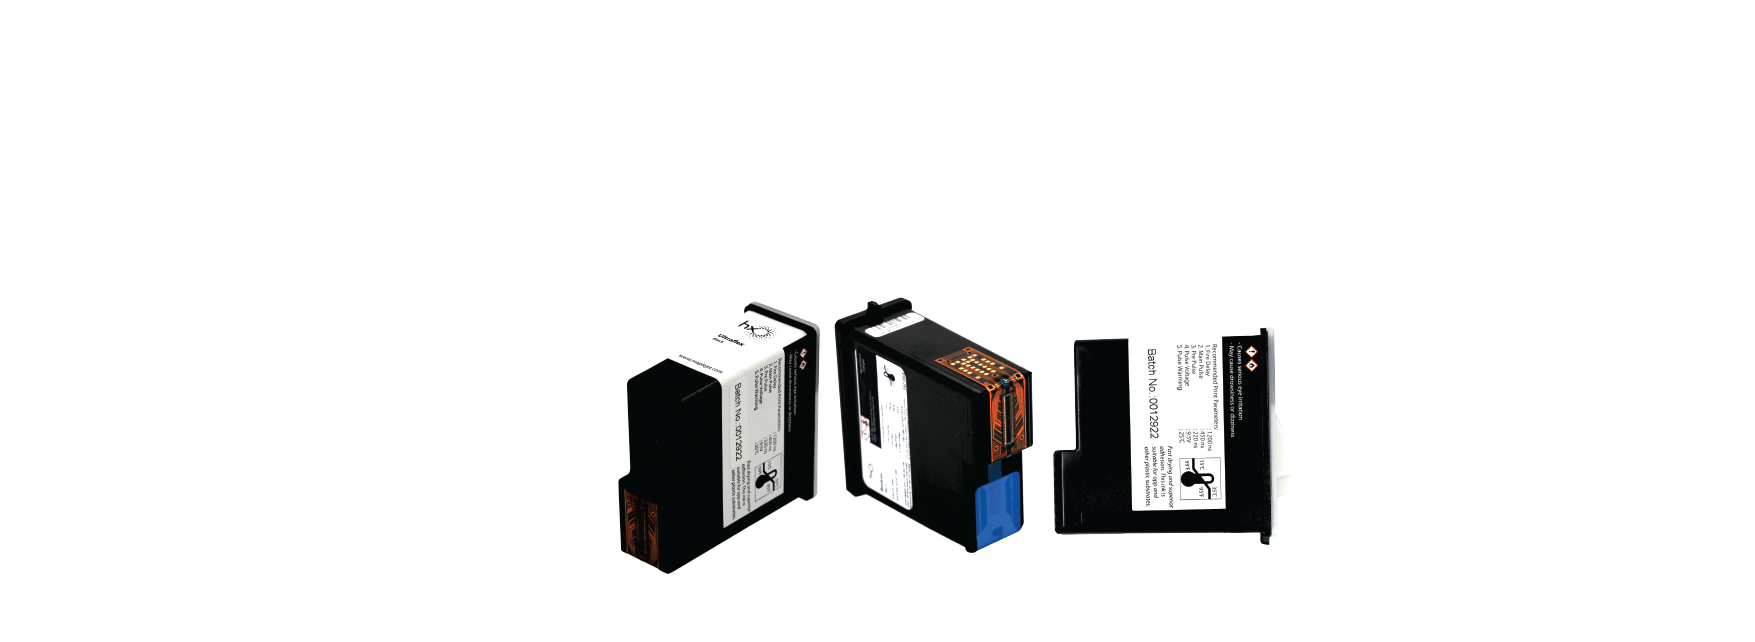 Hx Nitro Funai-based ink cartridges and their recommended applications